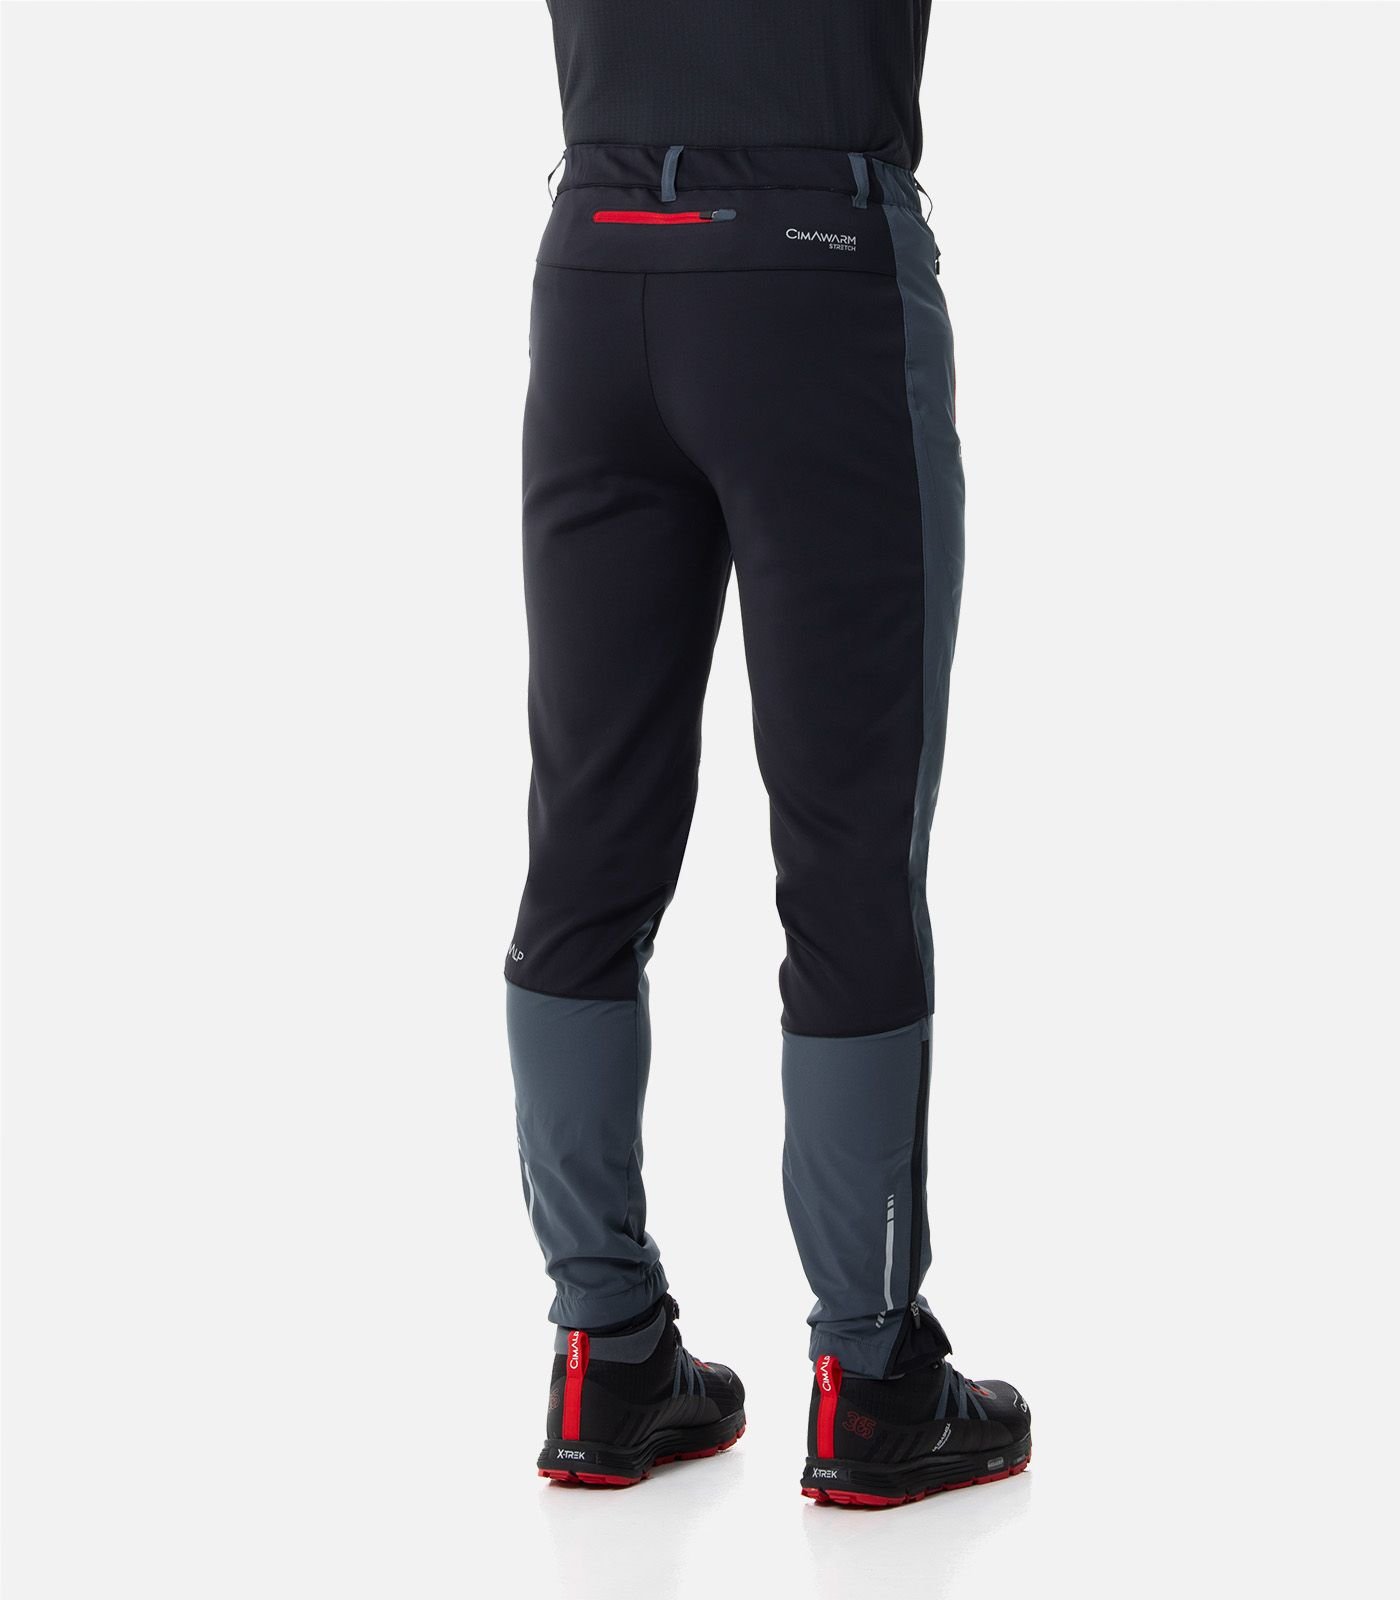 Trousers for Winter activities